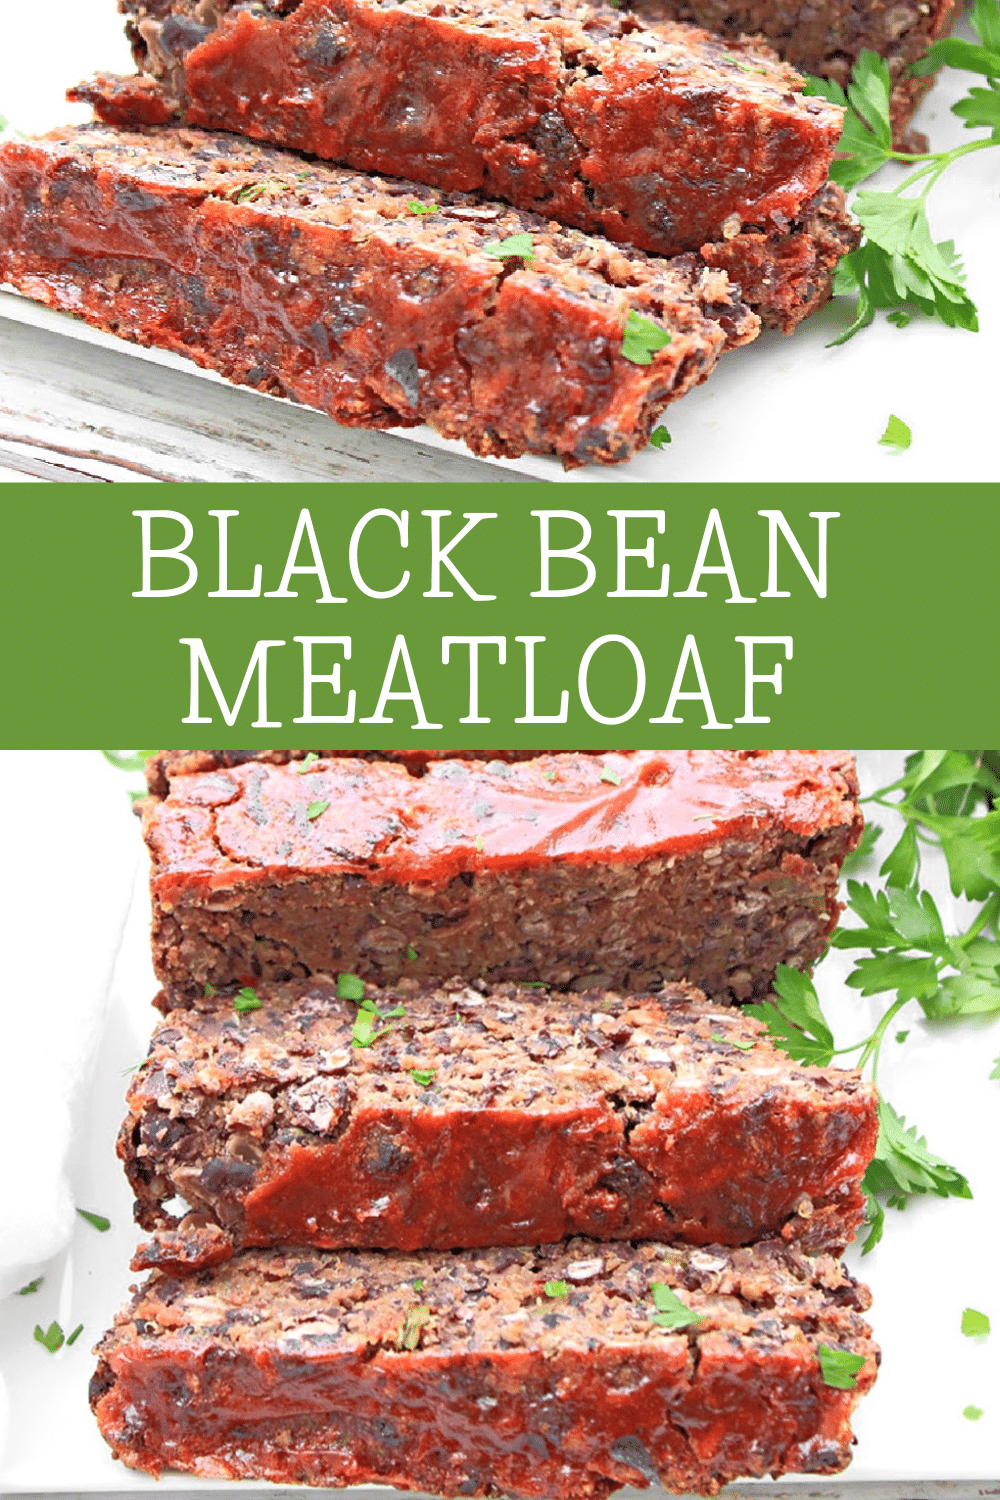 Black Bean Meatloaf ~ Vegan Recipe ~ Old school style meatloaf with protein-packed black beans, quinoa, simple seasonings, and homemade ketchup-based glaze. via @thiswifecooks